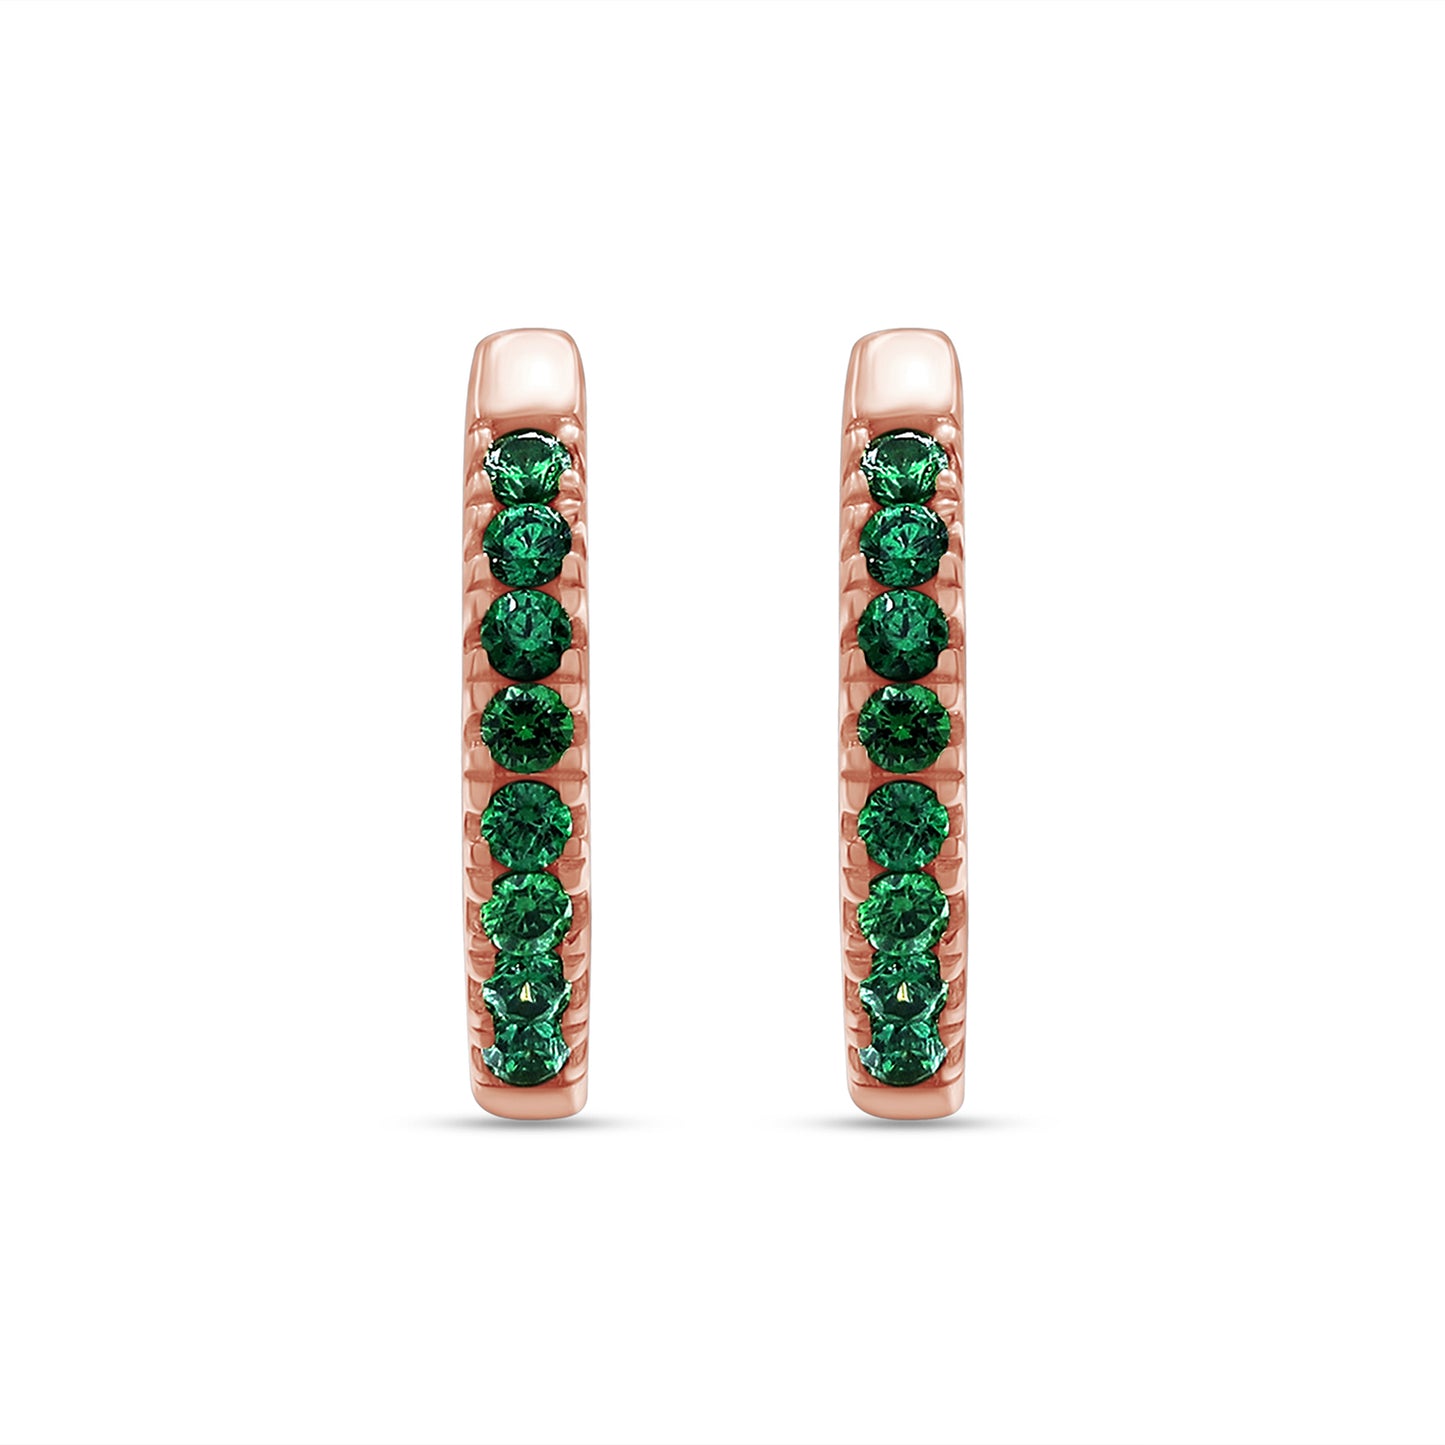 Round Cut Simulated Green Emerald Huggie Hoop Earrings For Womens In 10K Or 14K Solid Gold And 925 Sterling Silver